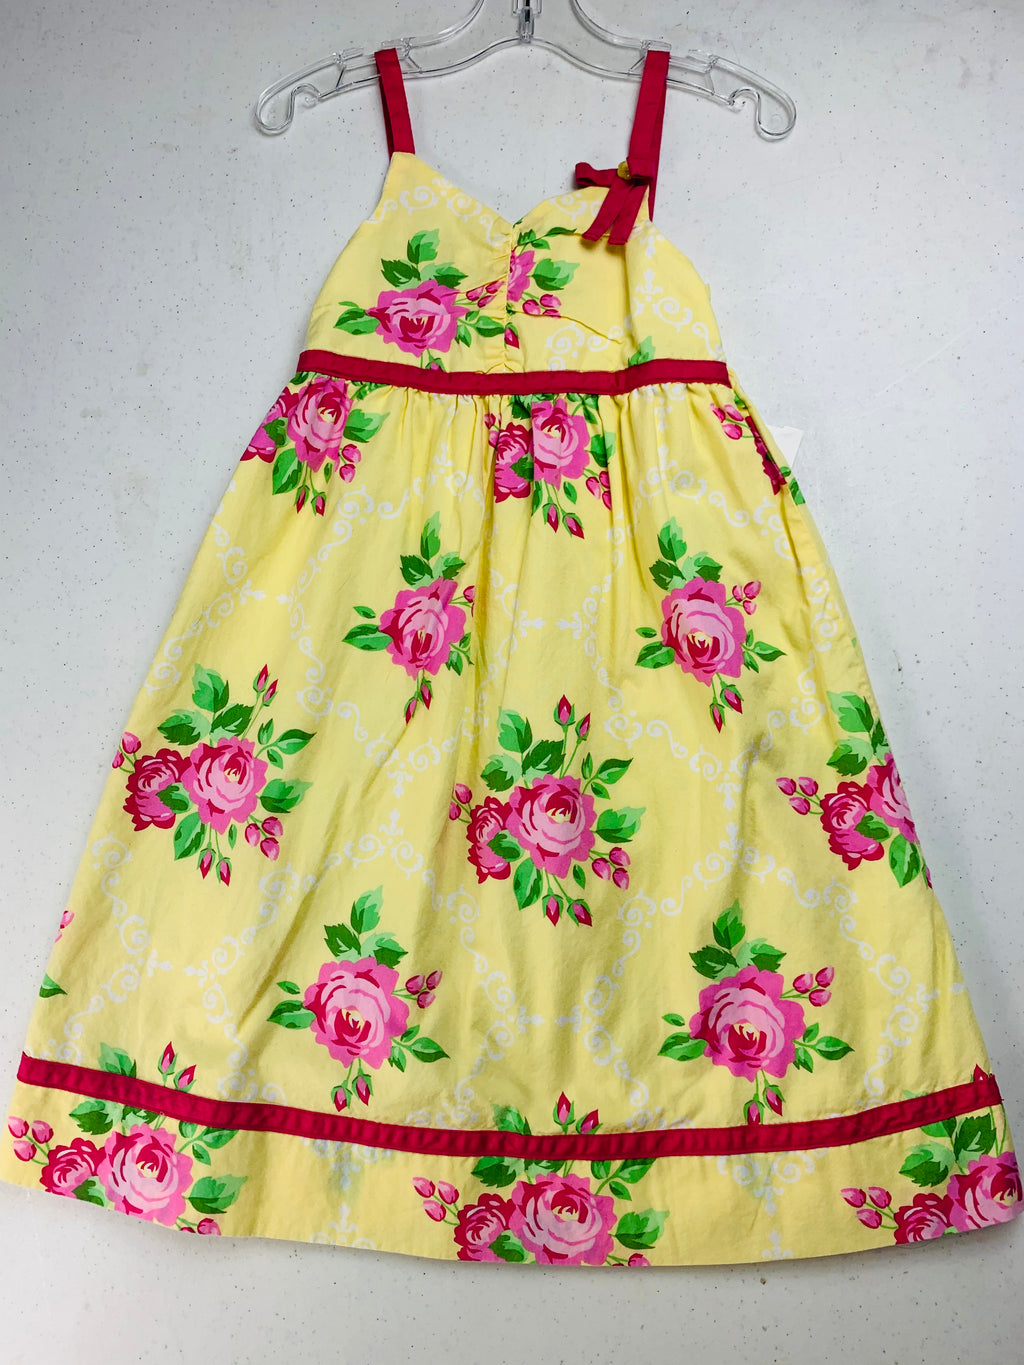 Resale Penelope and Mack yellow dress with pink rose 5T 🧵